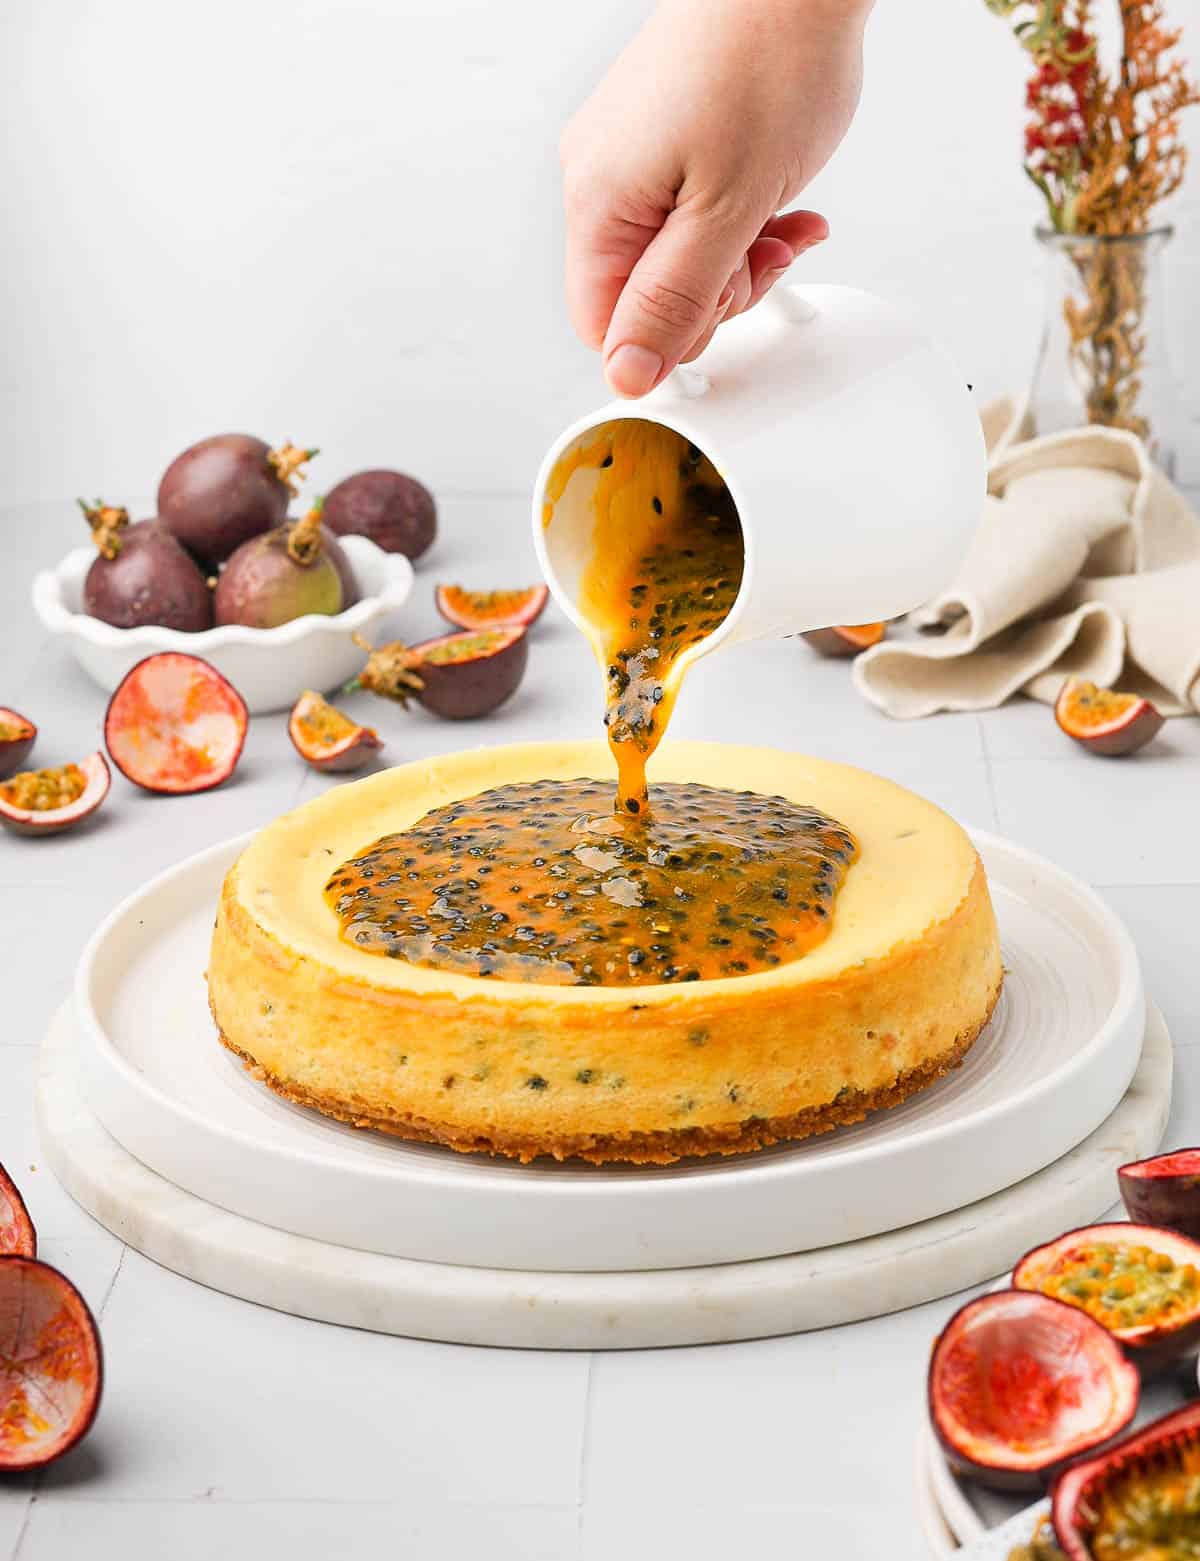 Pouring the passion fruit sauce over a cheesecake.